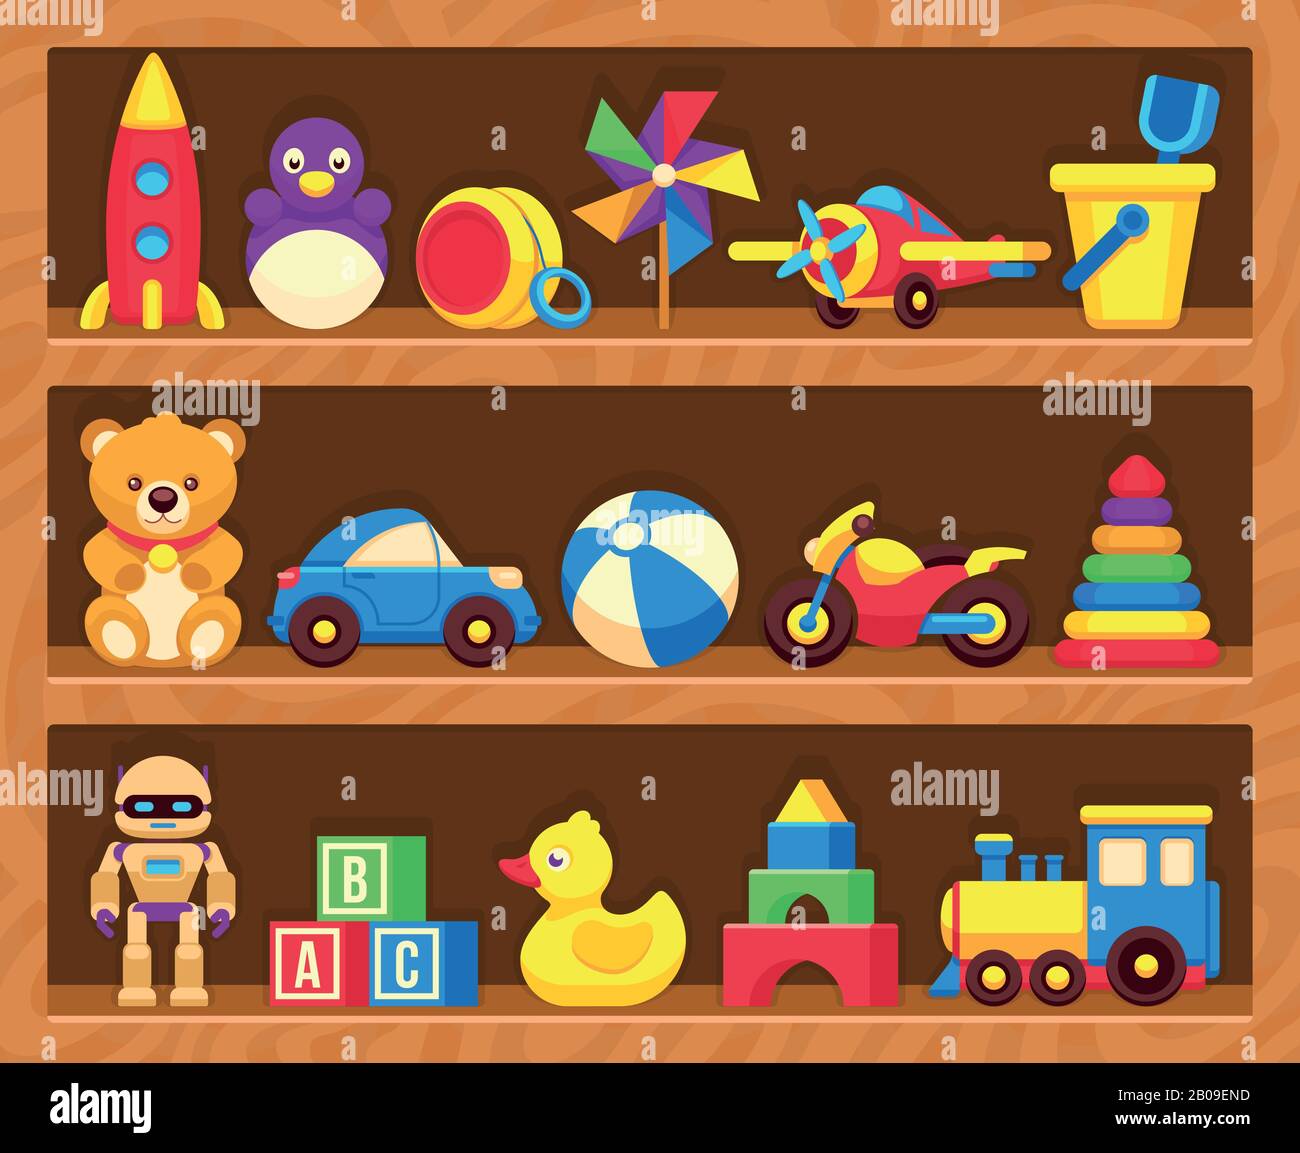 Kids toys on wood shop shelves. Toys in shelf robot and motorcycle, kids toys duck and teddy bear illustration Stock Vector